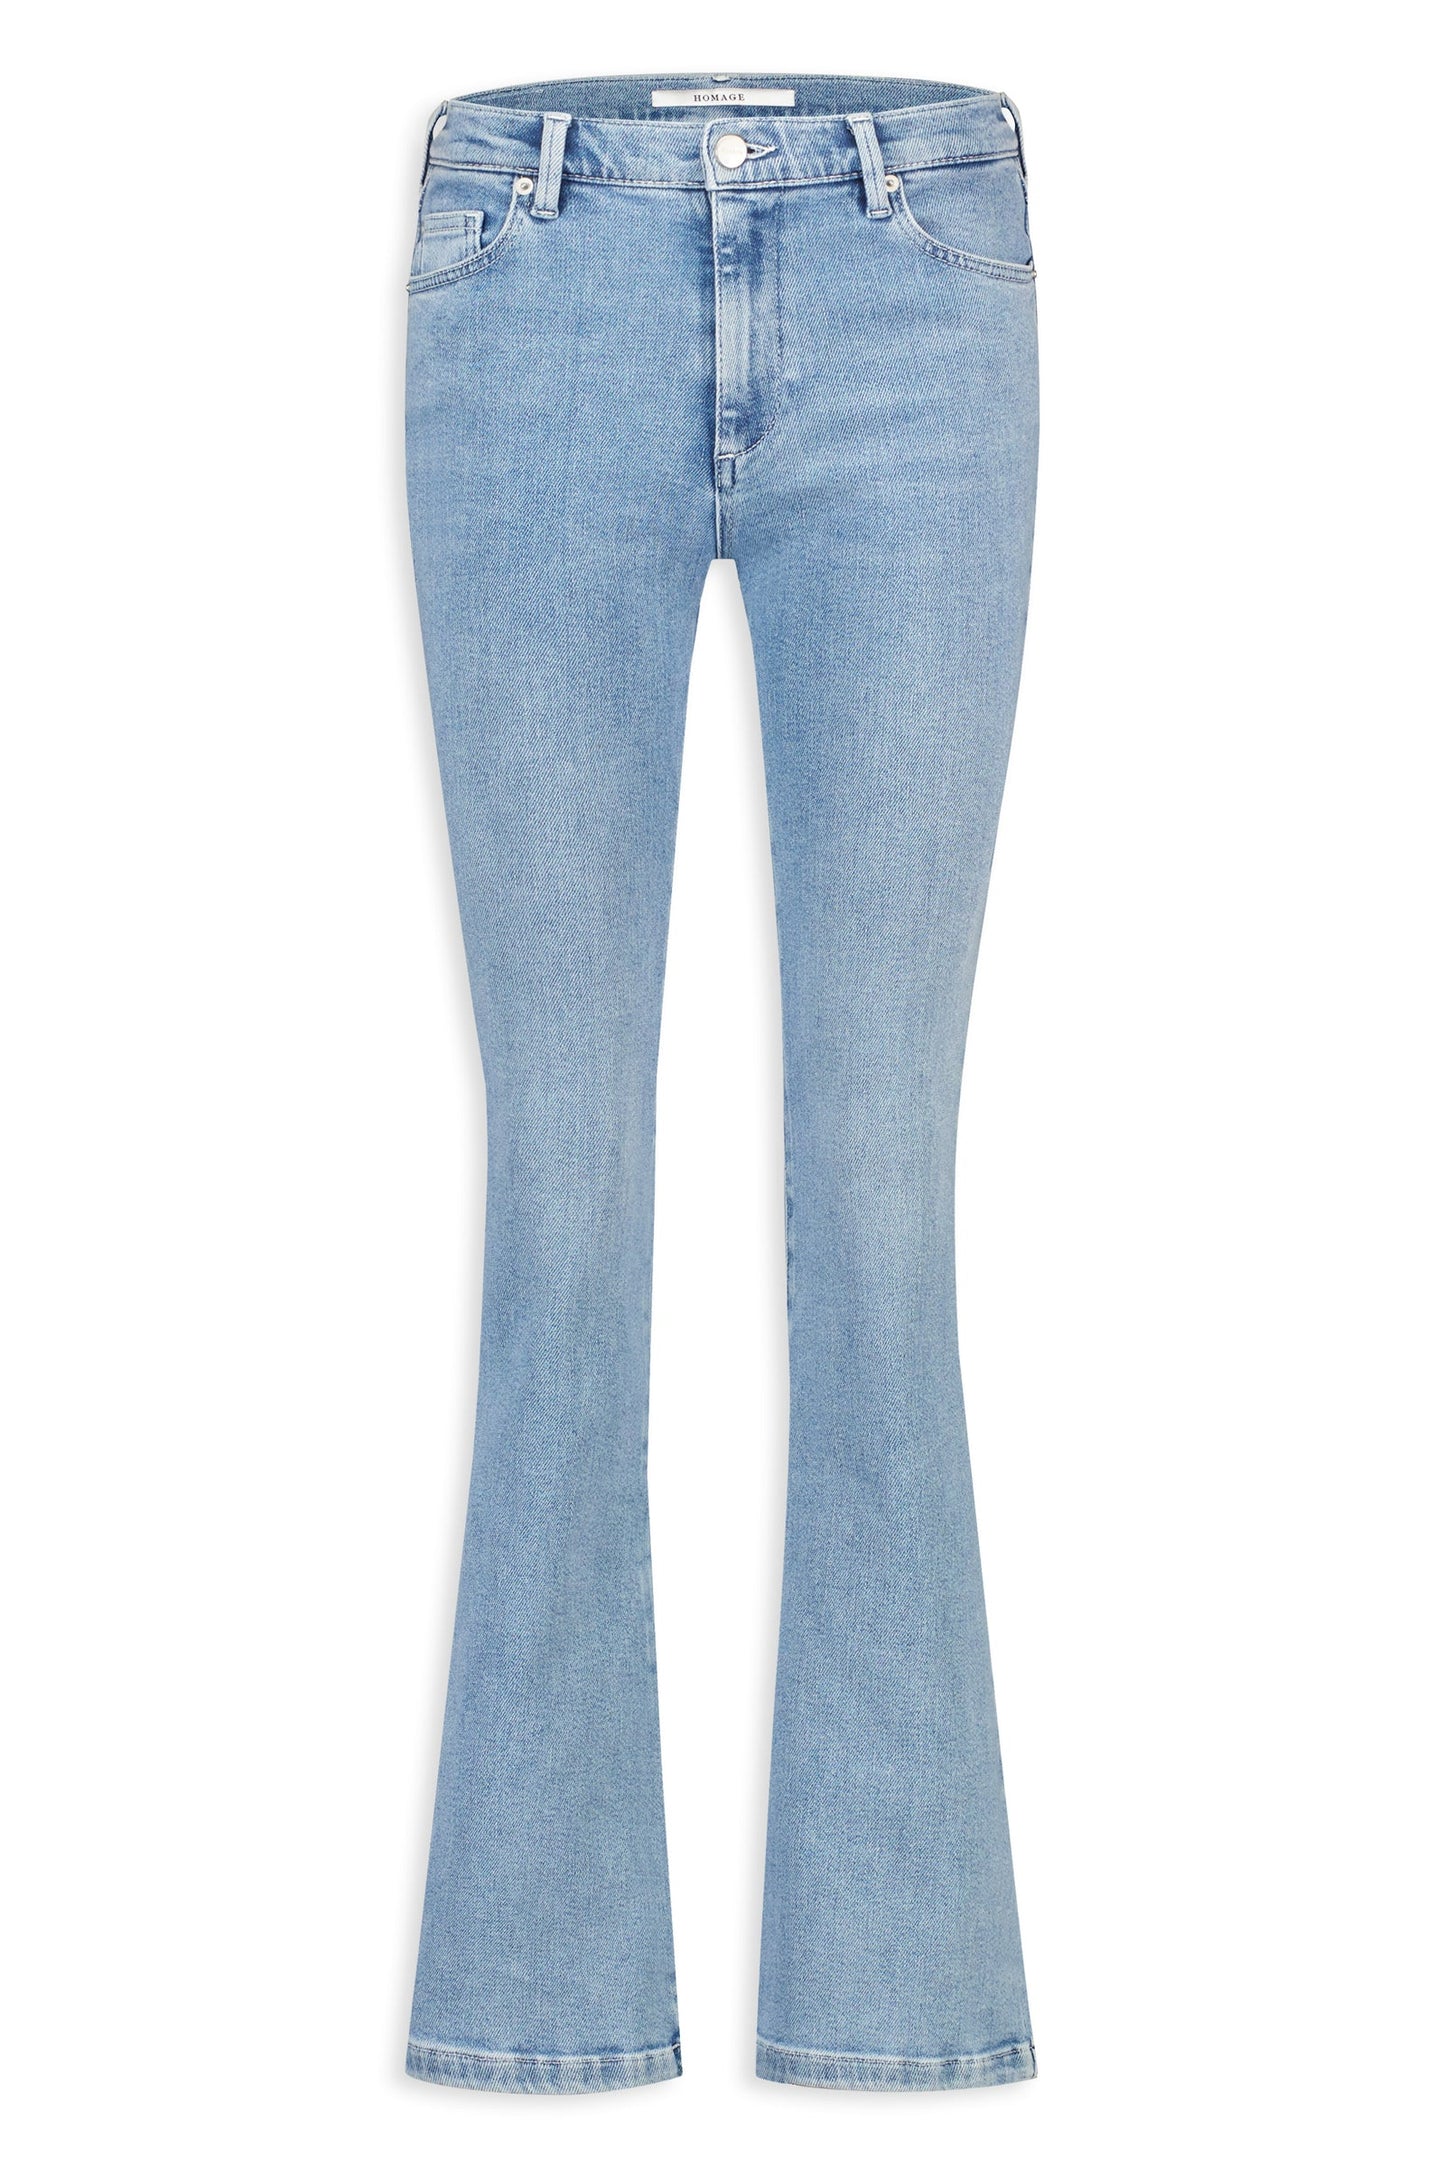 Homage | Britney Mid Waist Bootcut Jeans - Washed blue - H-CS23M19